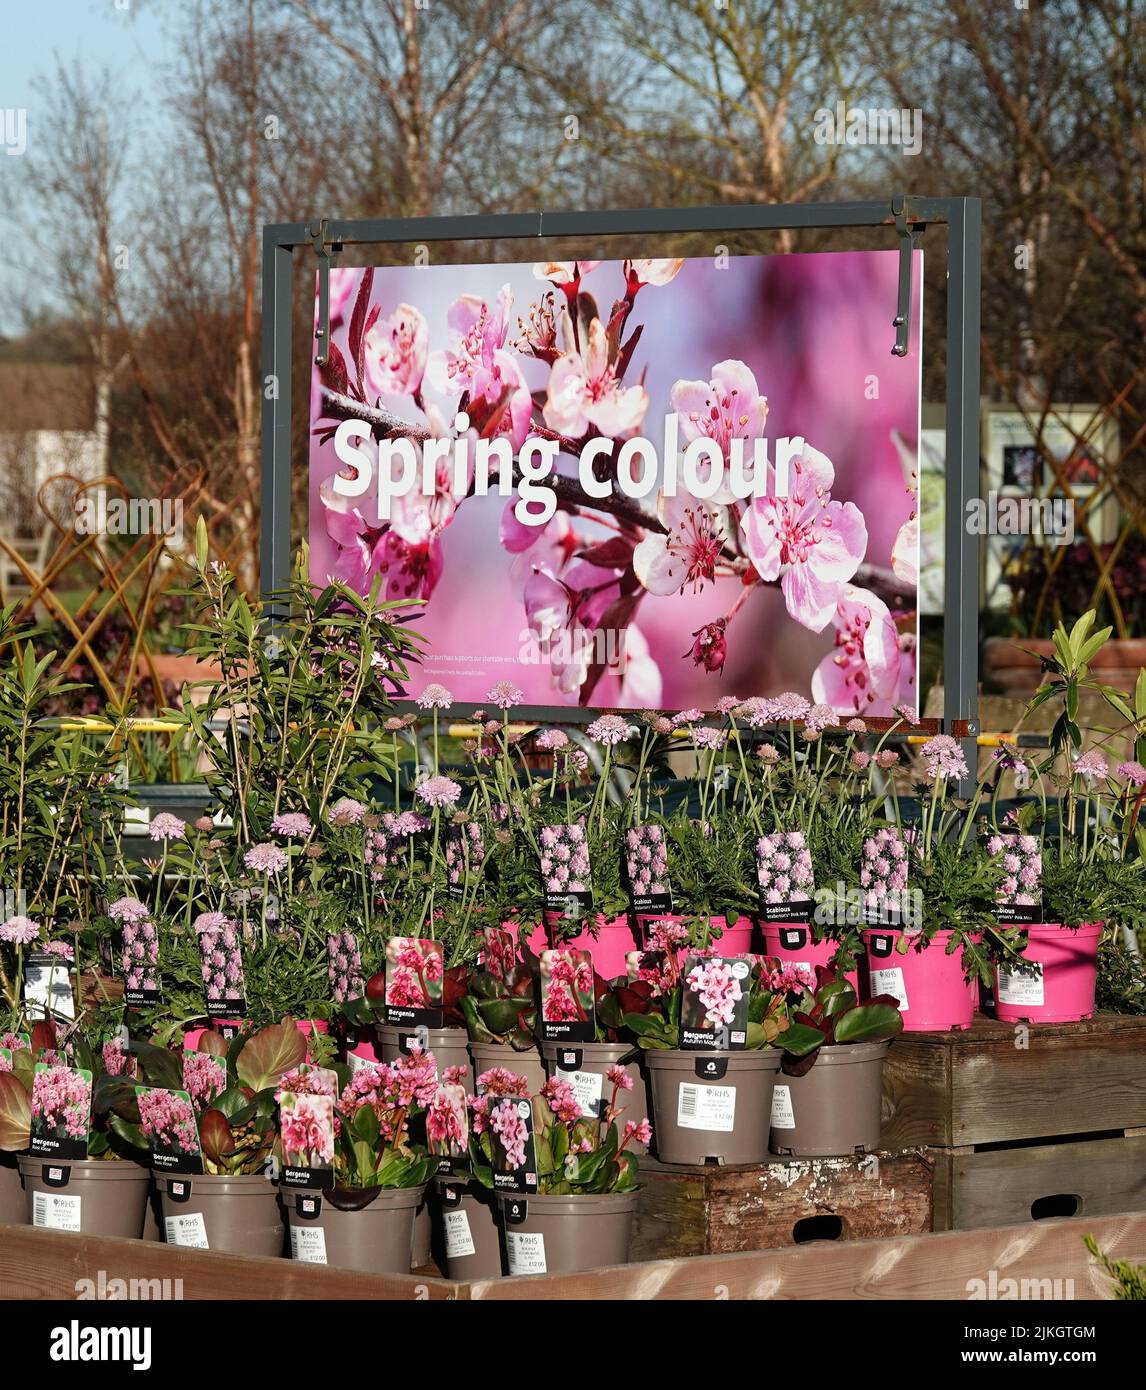 A beautiful Spring Colour sign in the garden at RHS Hyde Hall, Chelmsford, Essex, UK Stock Photo